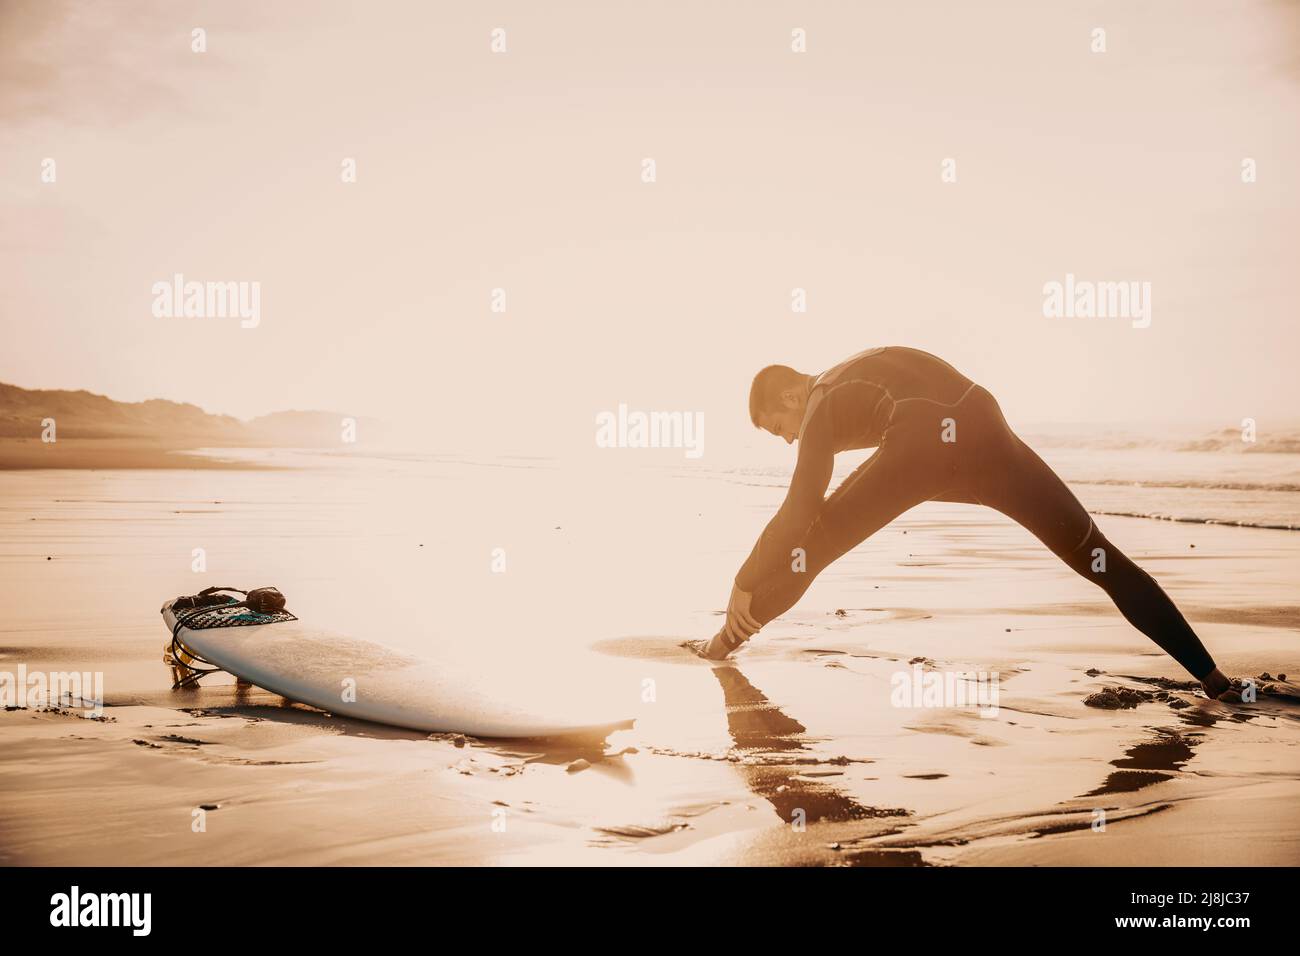 A surfer warming up before going surf Stock Photo